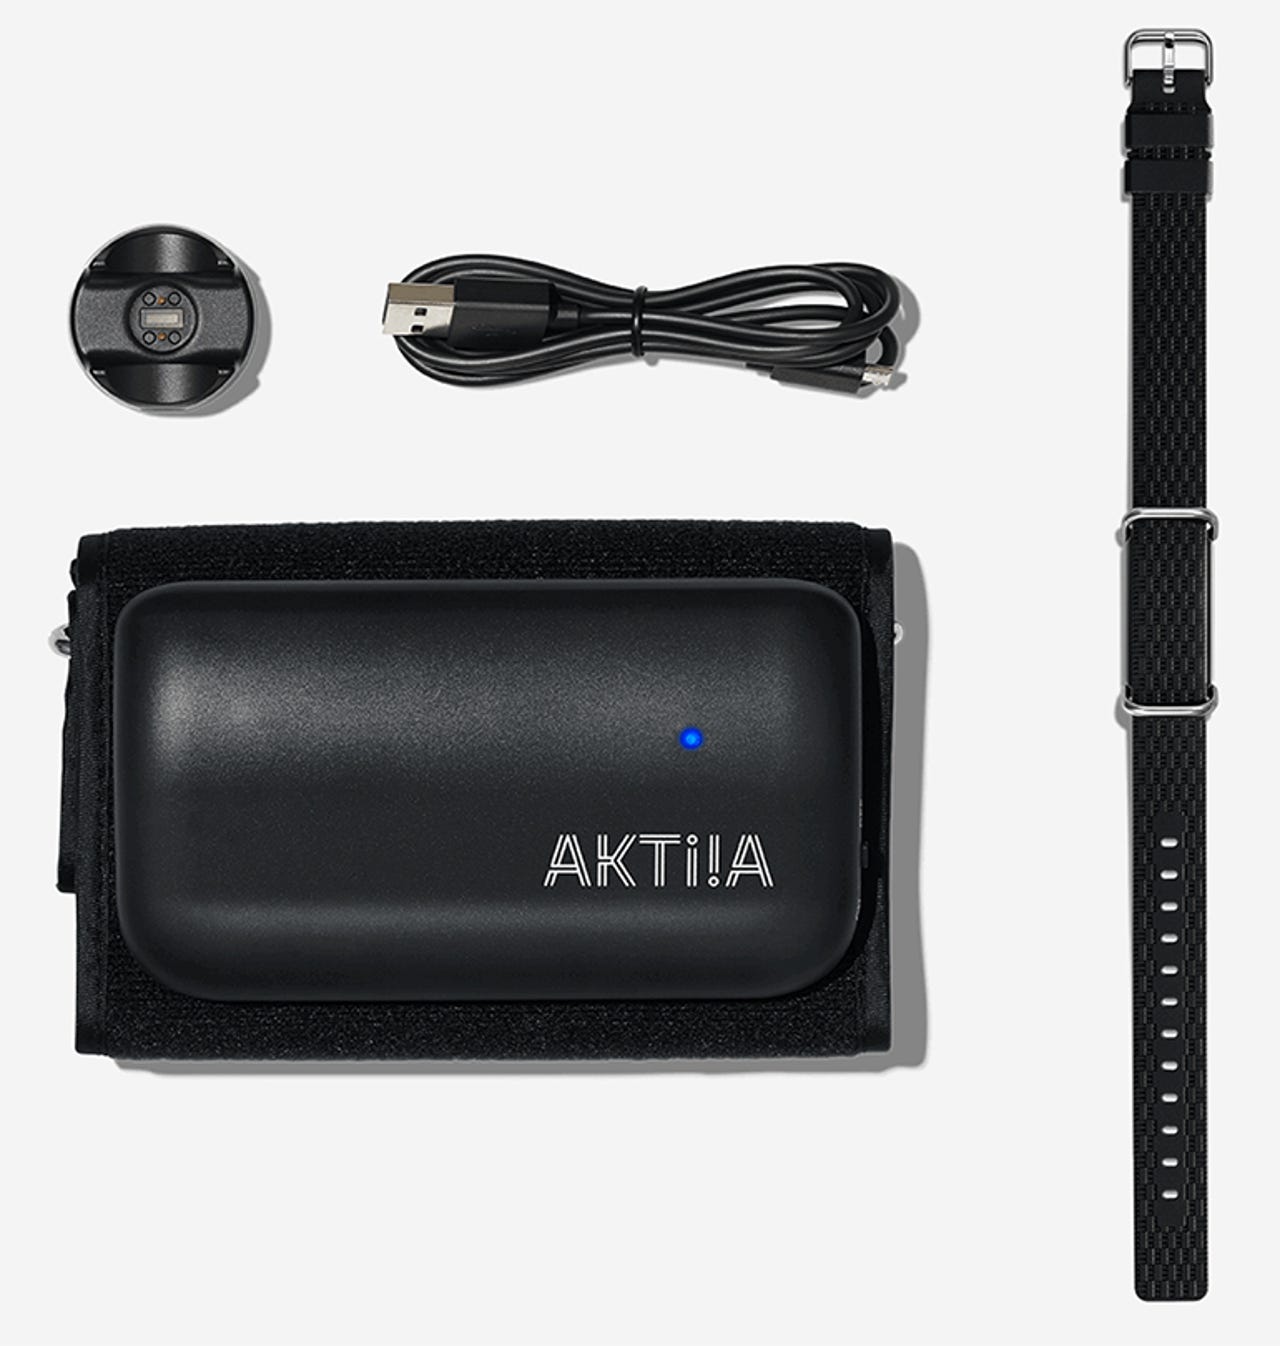 Aktiia 24/7 blood pressure monitor review: Stalking the 'silent killer